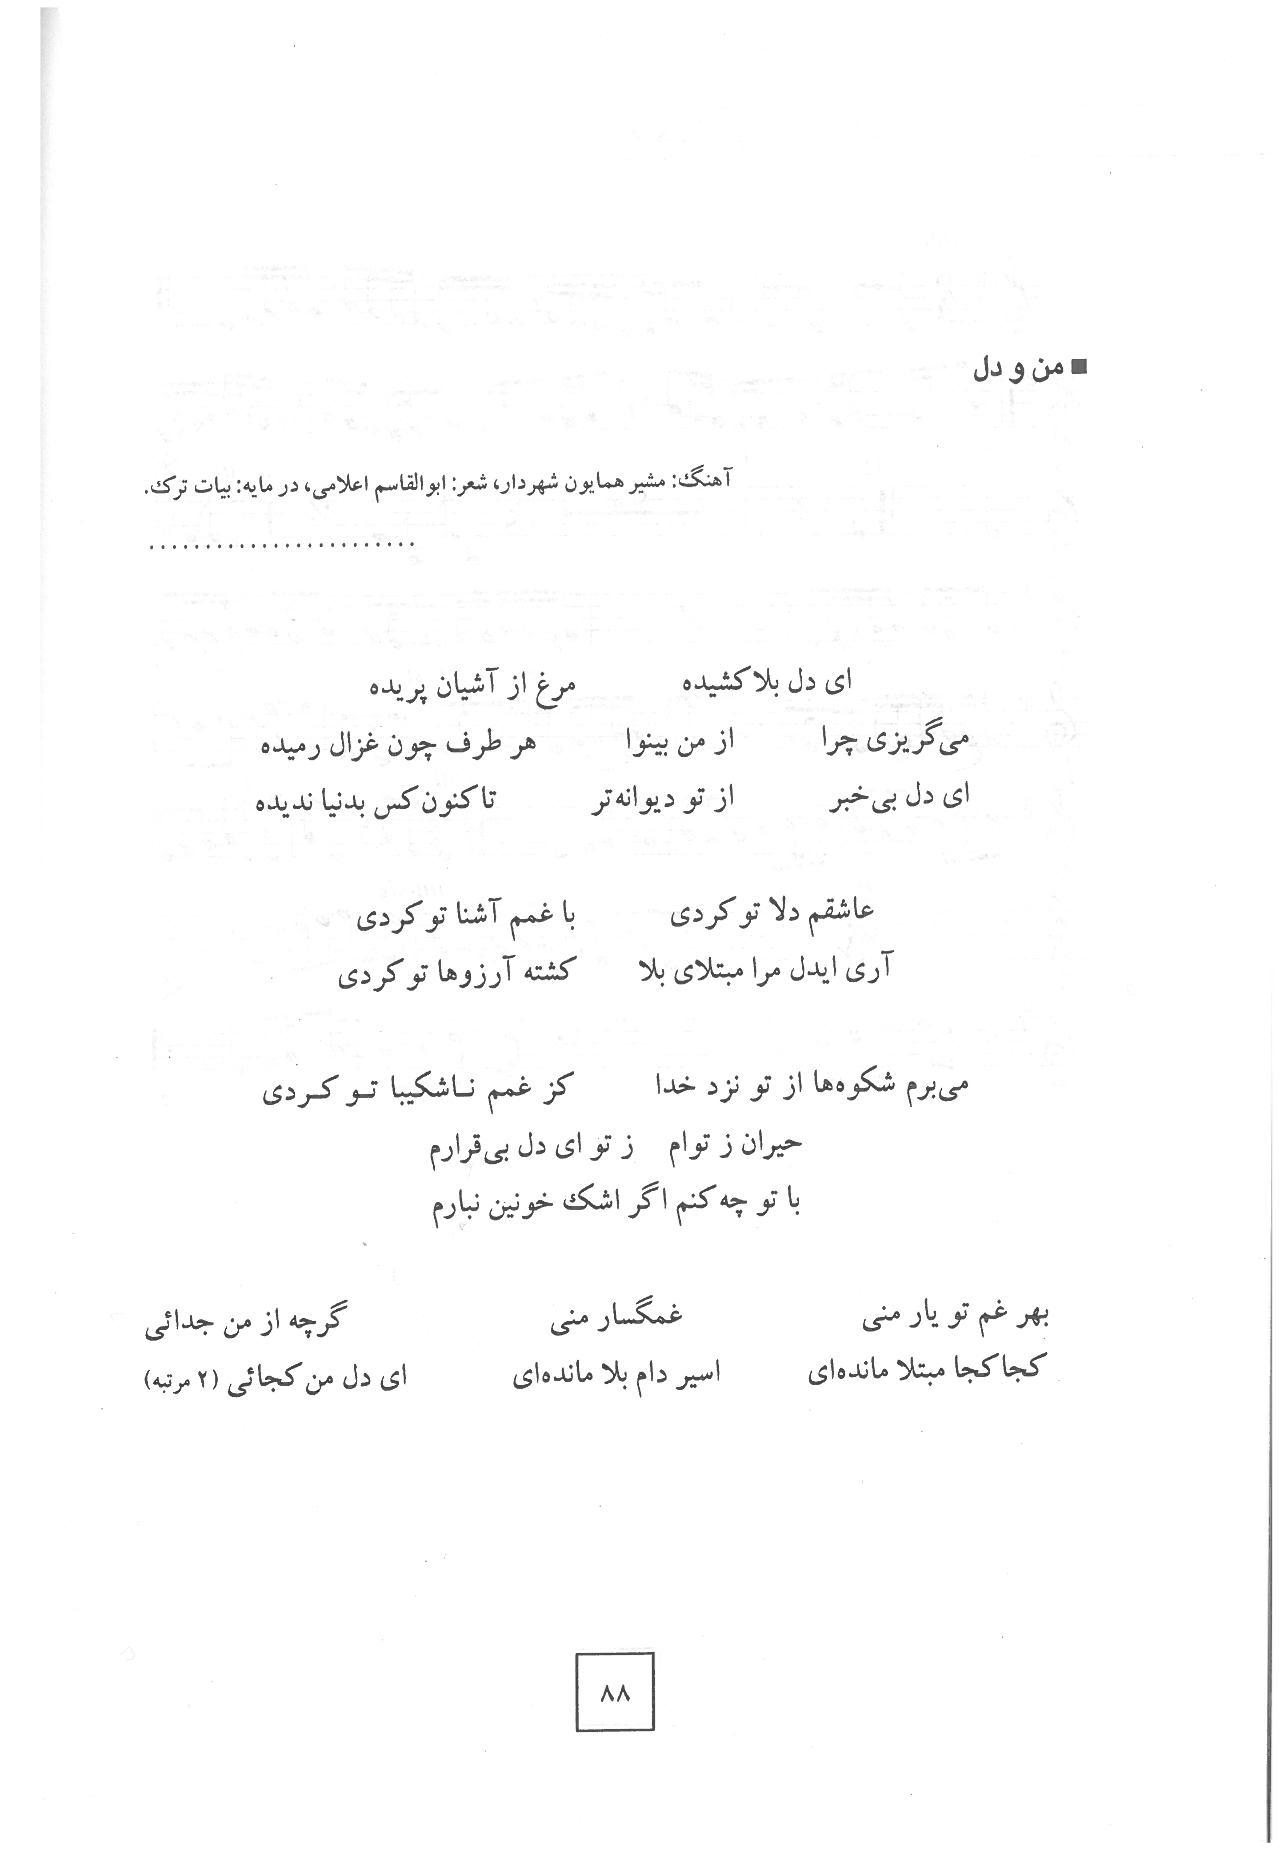 A page of arabic writing with the words in different languages.